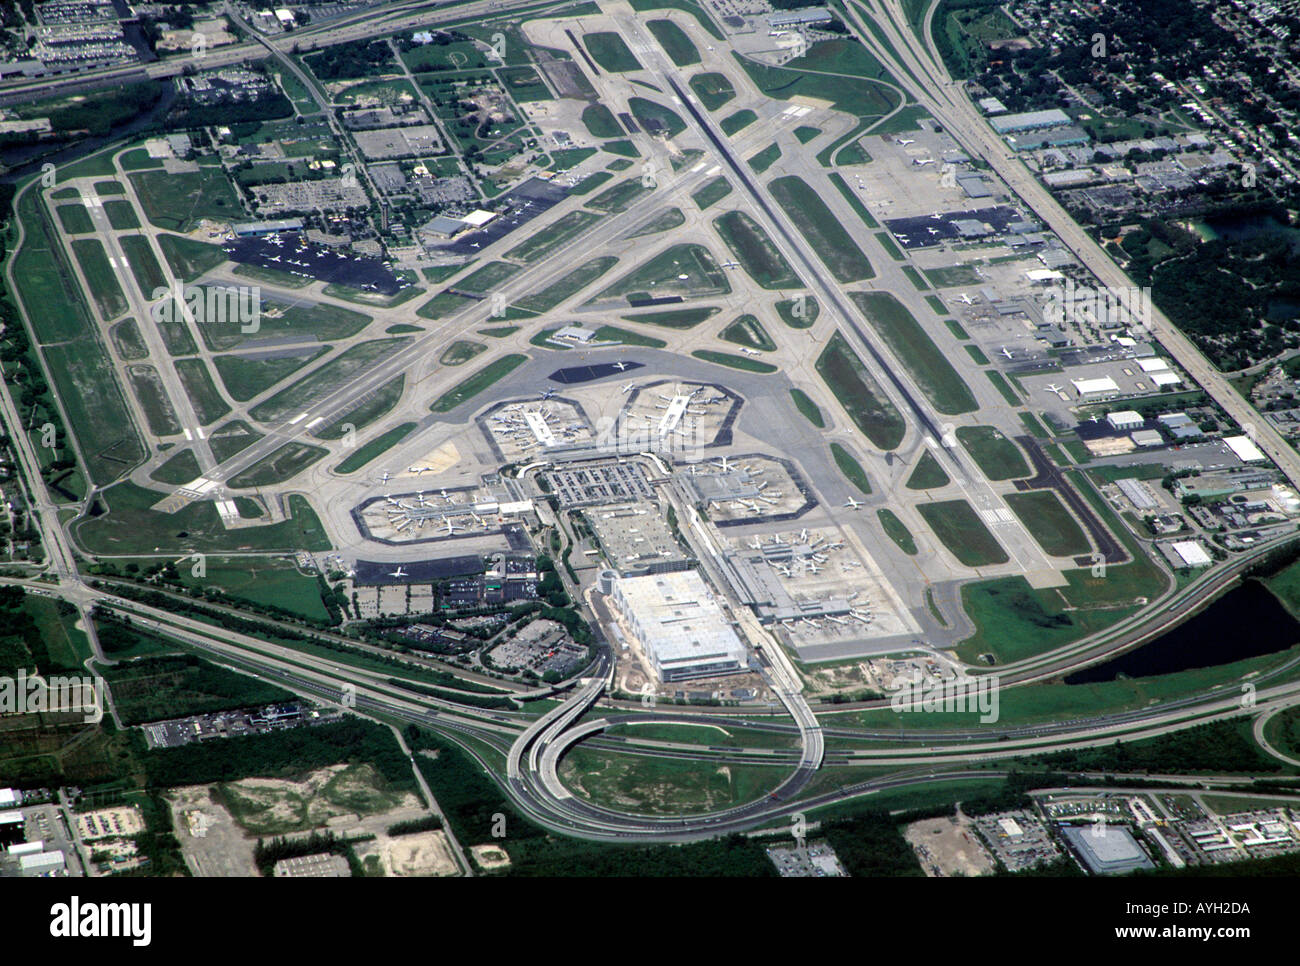 fort lauderdale airport address